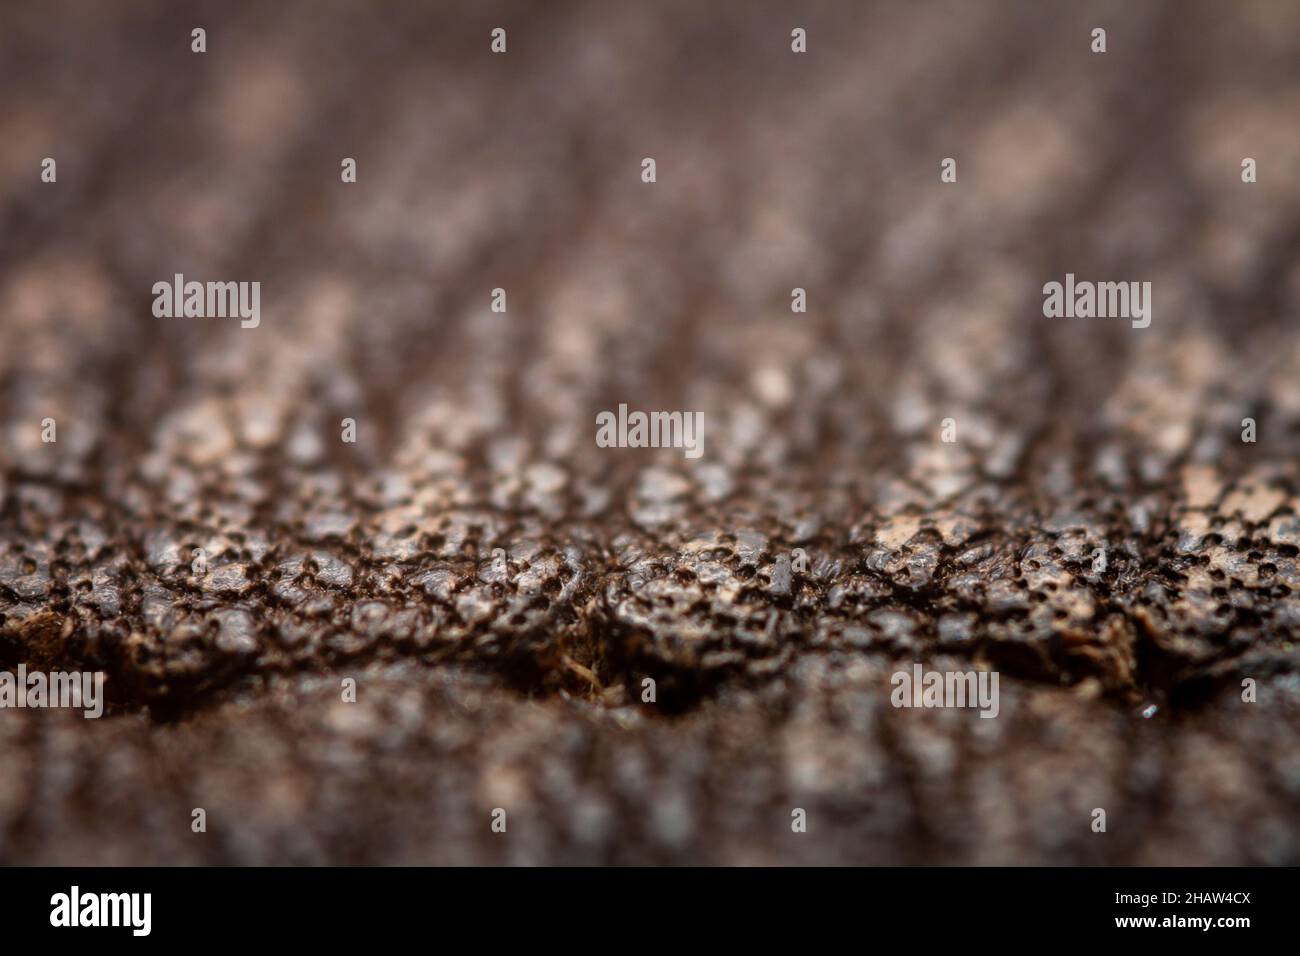 Extreme closeup of a leather, shallow deph of field. Macro for brown leather. Selective focus. Stock Photo